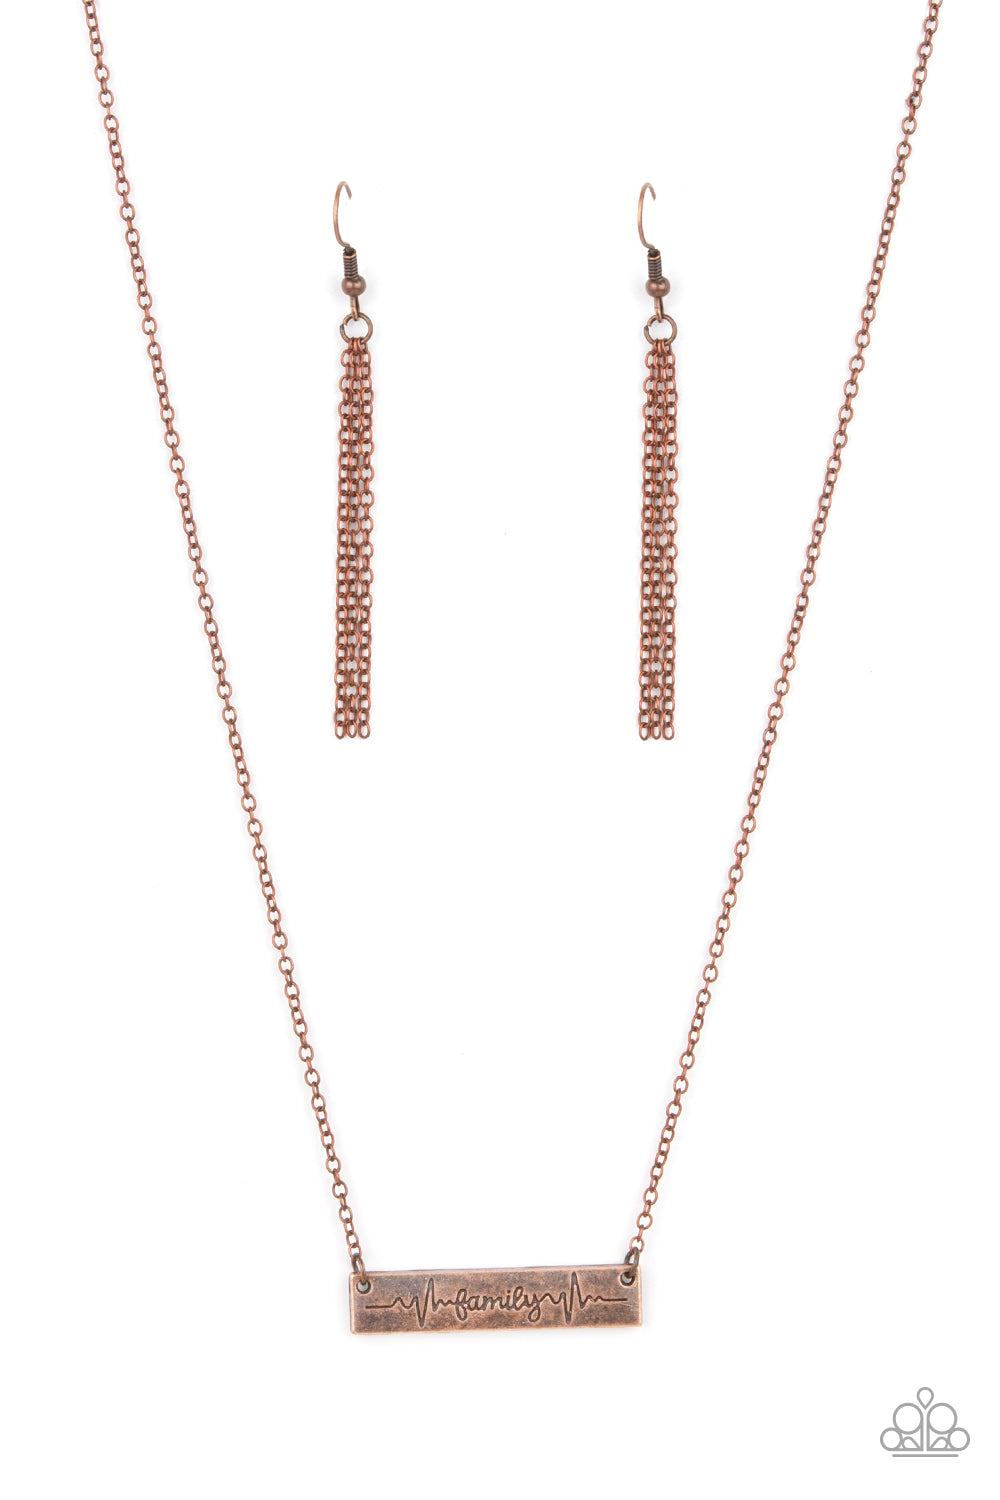 Living The Mom Life Copper Necklace - Paparazzi Accessories  The word "Family," is inscribed between symbolic life lines on a rectangular copper plate creating an affectionate keepsake on a dainty copper chain below the collar. Features an adjustable clasp closure.  Sold as one individual necklace. Includes one pair of matching earrings.